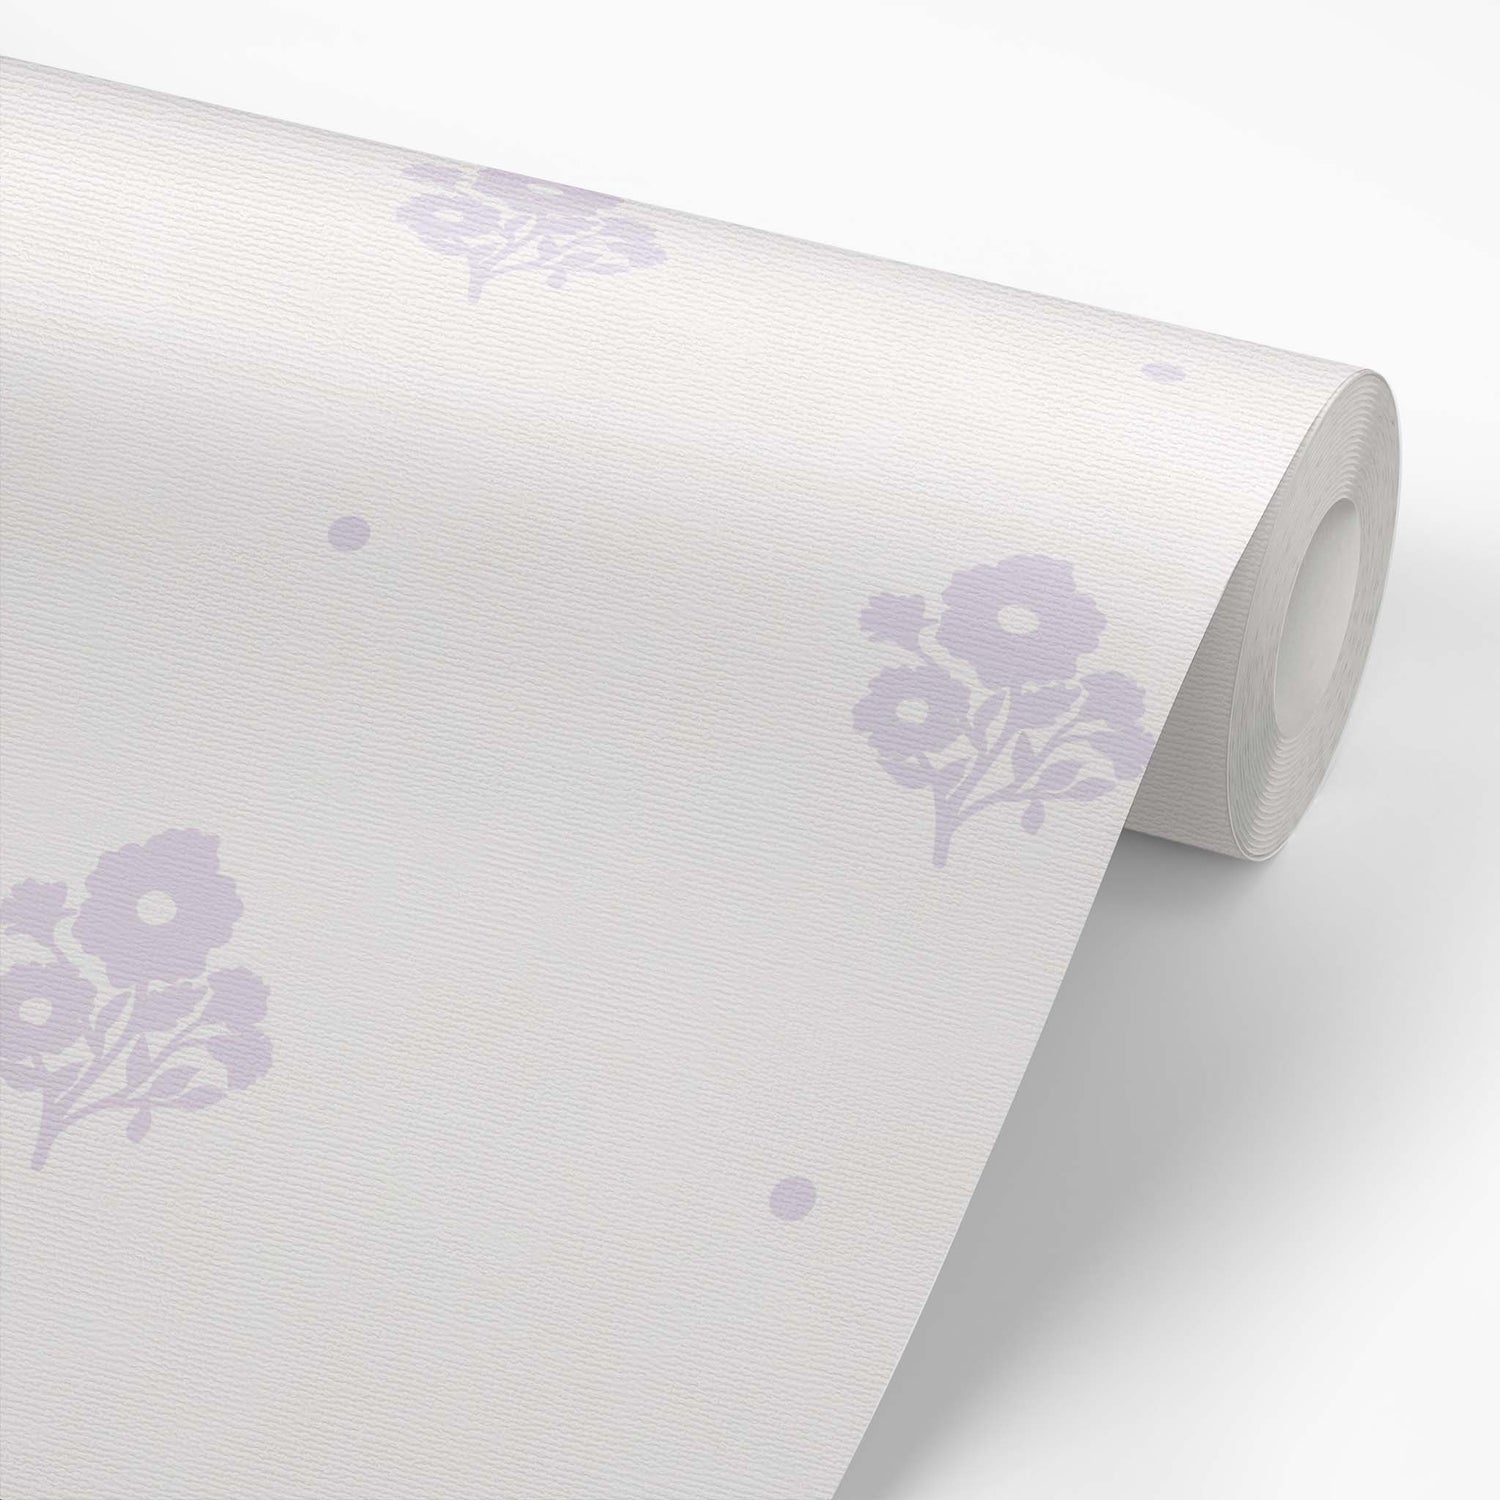 Elevate your home decor with our Cambridge Wallpaper in a sophisticated lavender shown on a wallpaper roll.